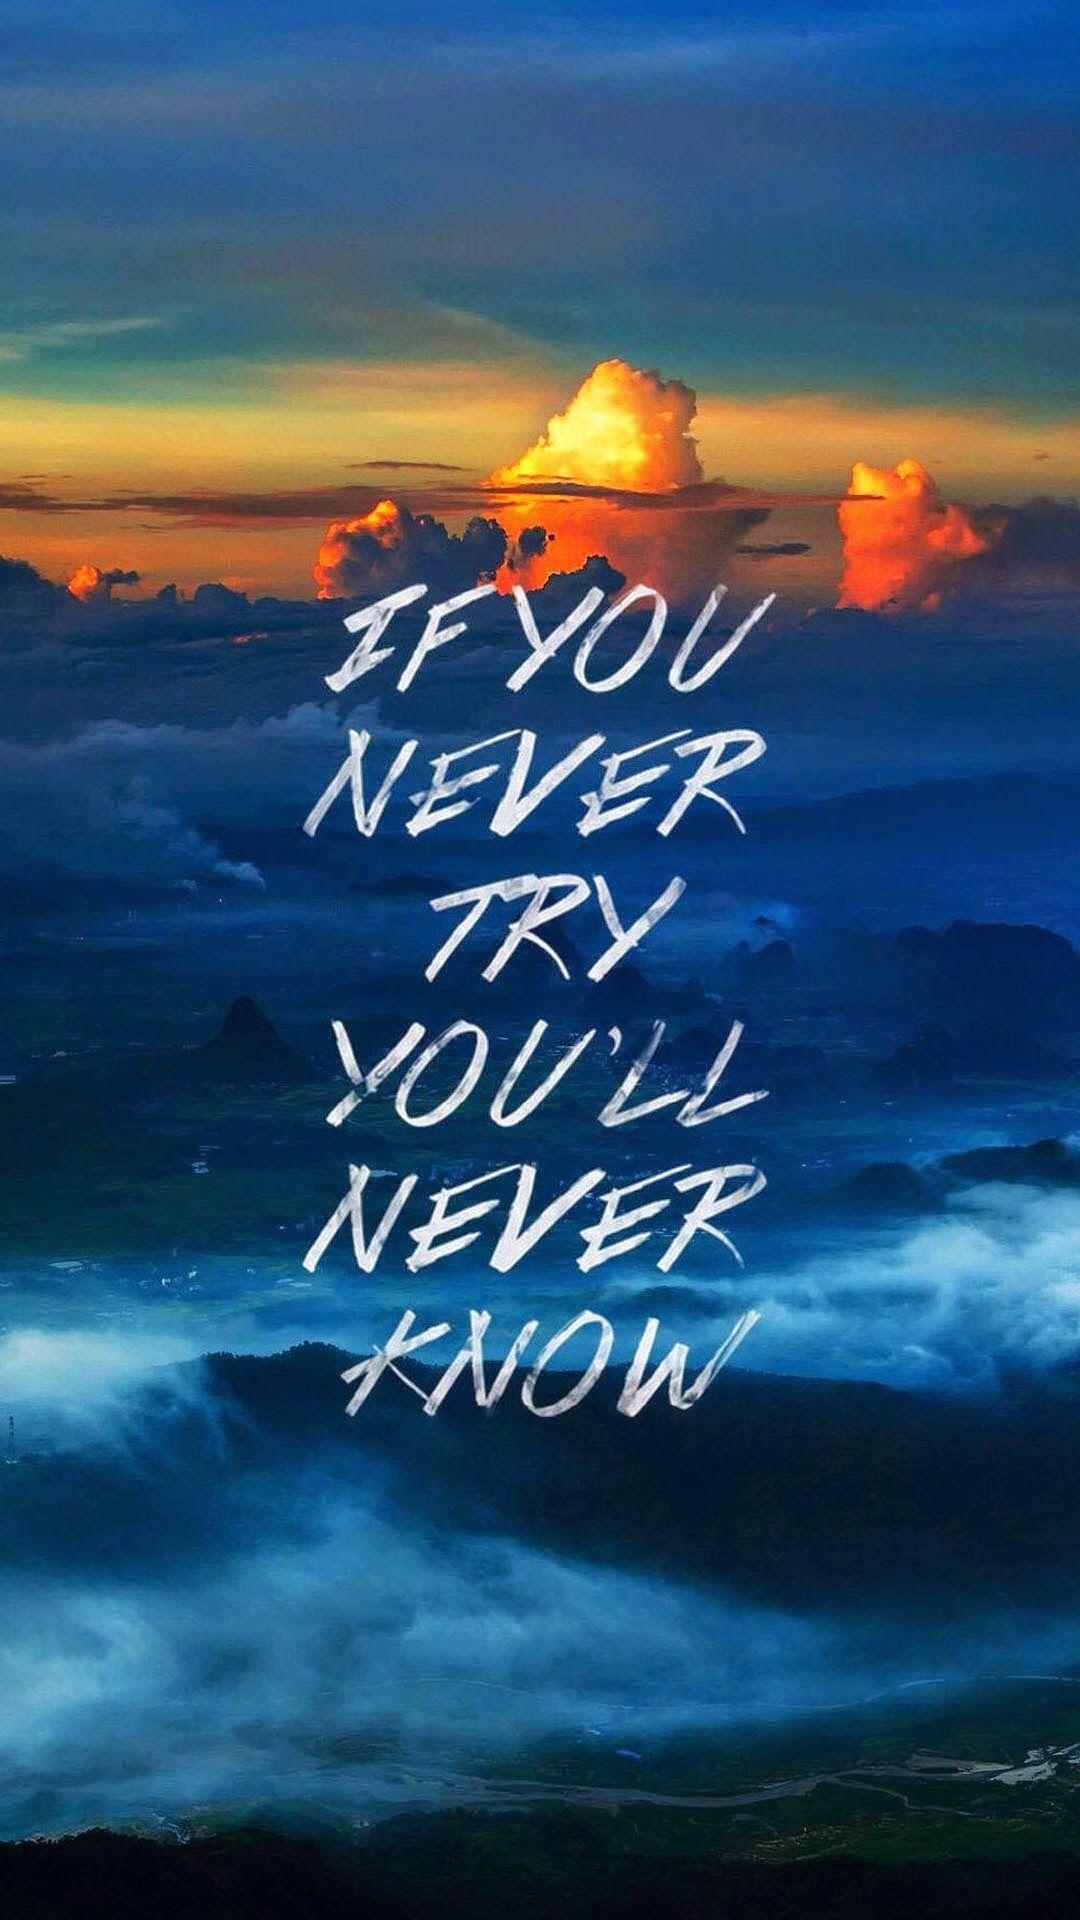 1080 x 1920 · jpeg - Never Know - mobile9 | Wallpaper quotes, Life quotes, Motivational ...